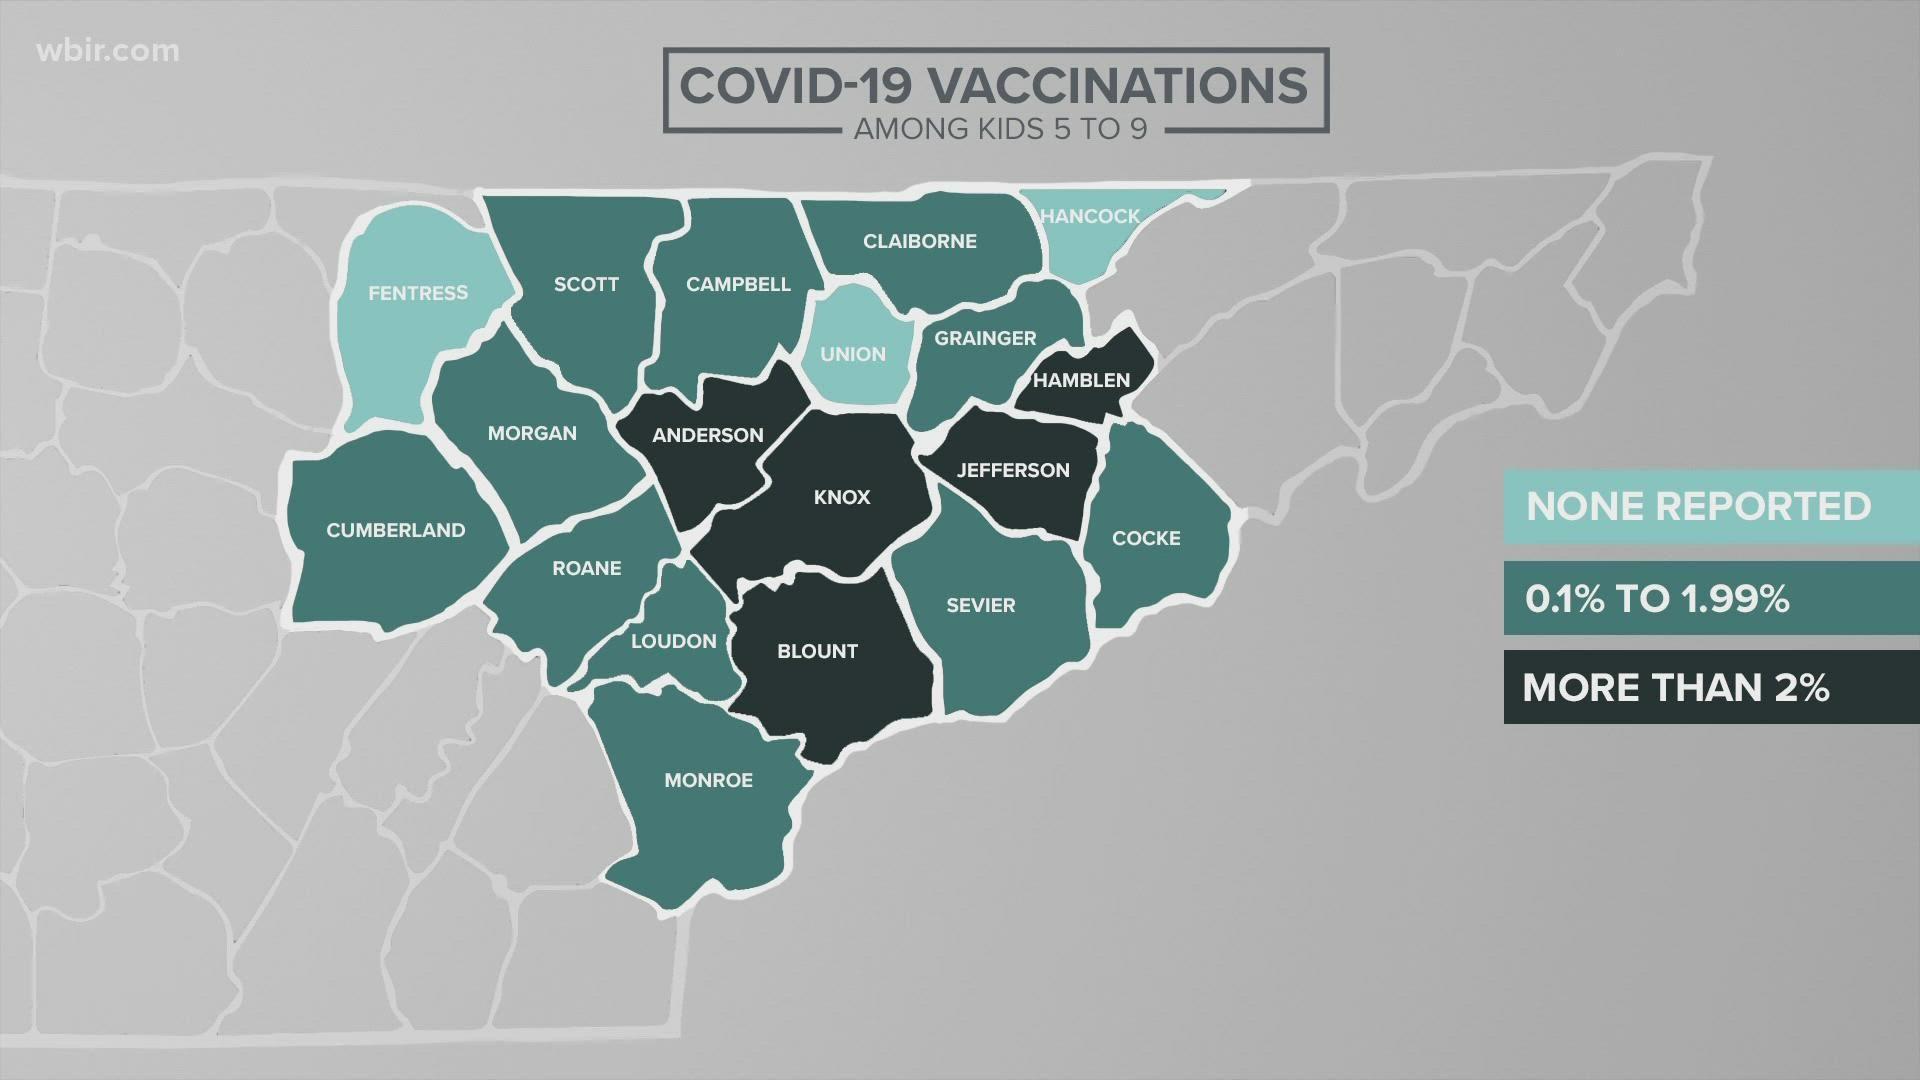 Three East Tn Counties Have Reported No Vaccination Of Kids 5-9 Wbircom